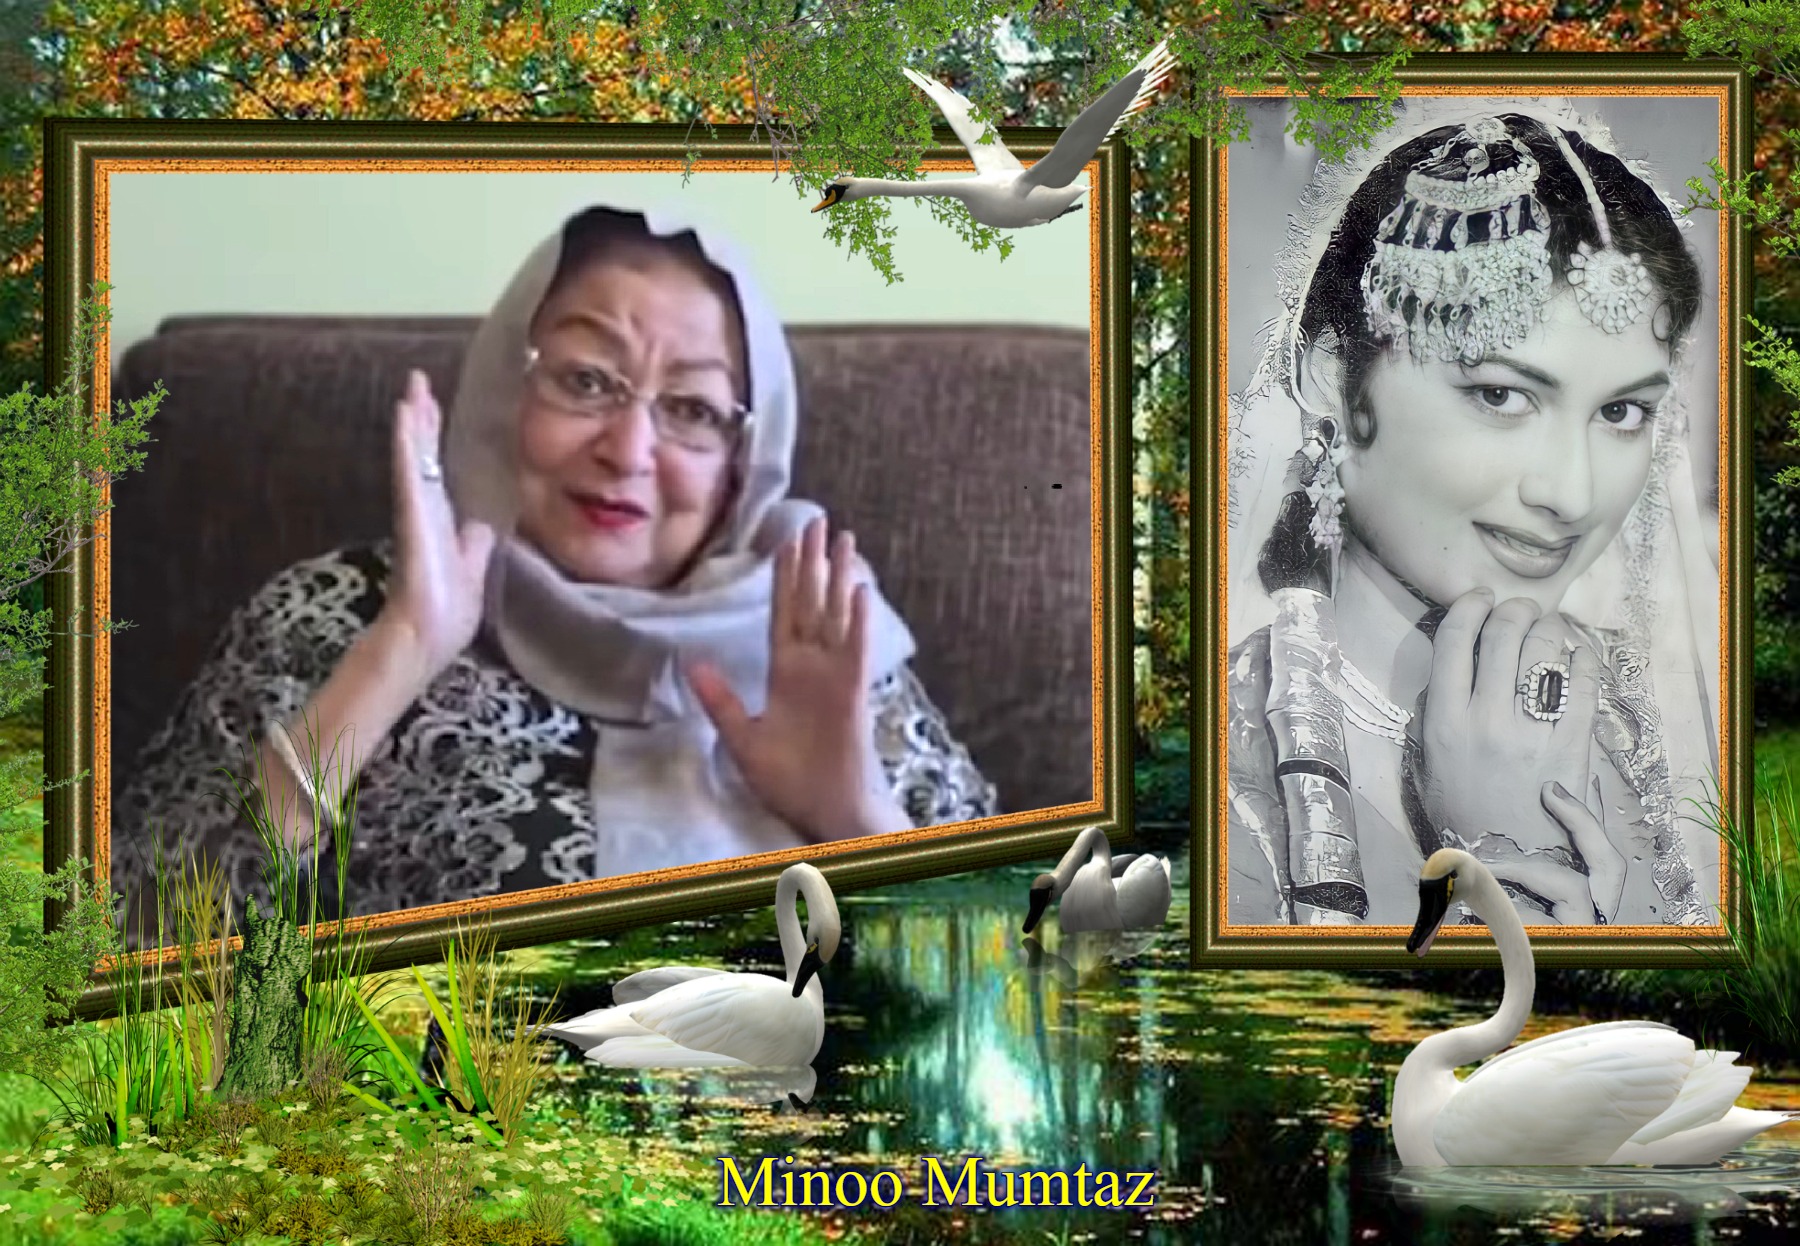 You are currently viewing “A wonderfully accomplished Actress- Minoo Mumtaz”